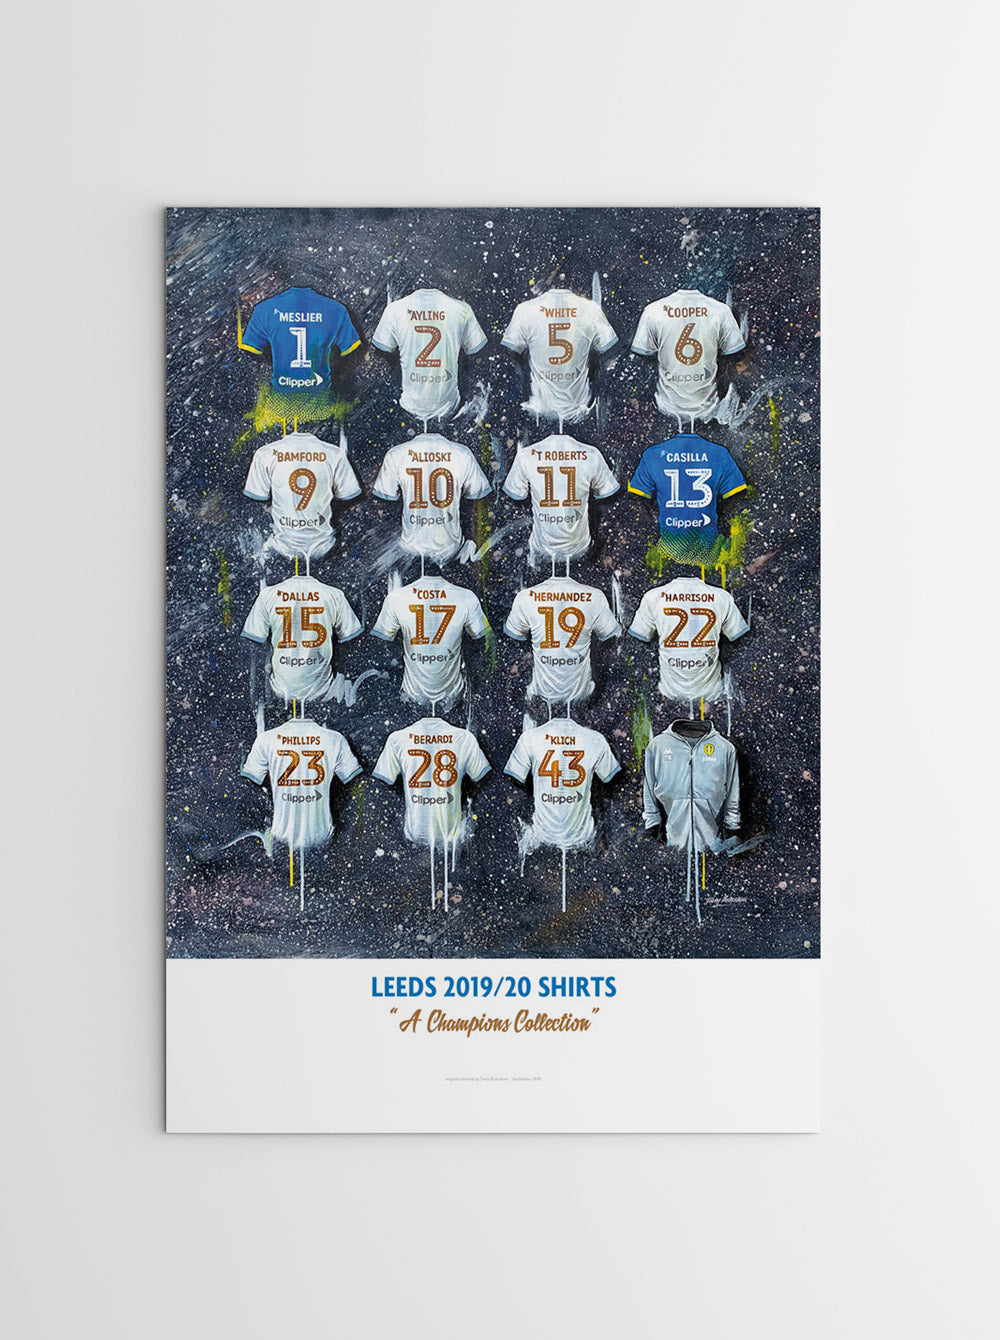 A limited edition print by Terry Kneeshaw featuring 16 iconic Leeds United football jerseys celebrating their championship-winning season. The print is size A2 and shows the jerseys from different eras arranged in a grid pattern against a white background. The jerseys include the iconic yellow and blue kit worn by the team during the 1970s, as well as the current white and blue strip with blue and yellow accents. The print is a celebration of Leeds United's history and achievements.